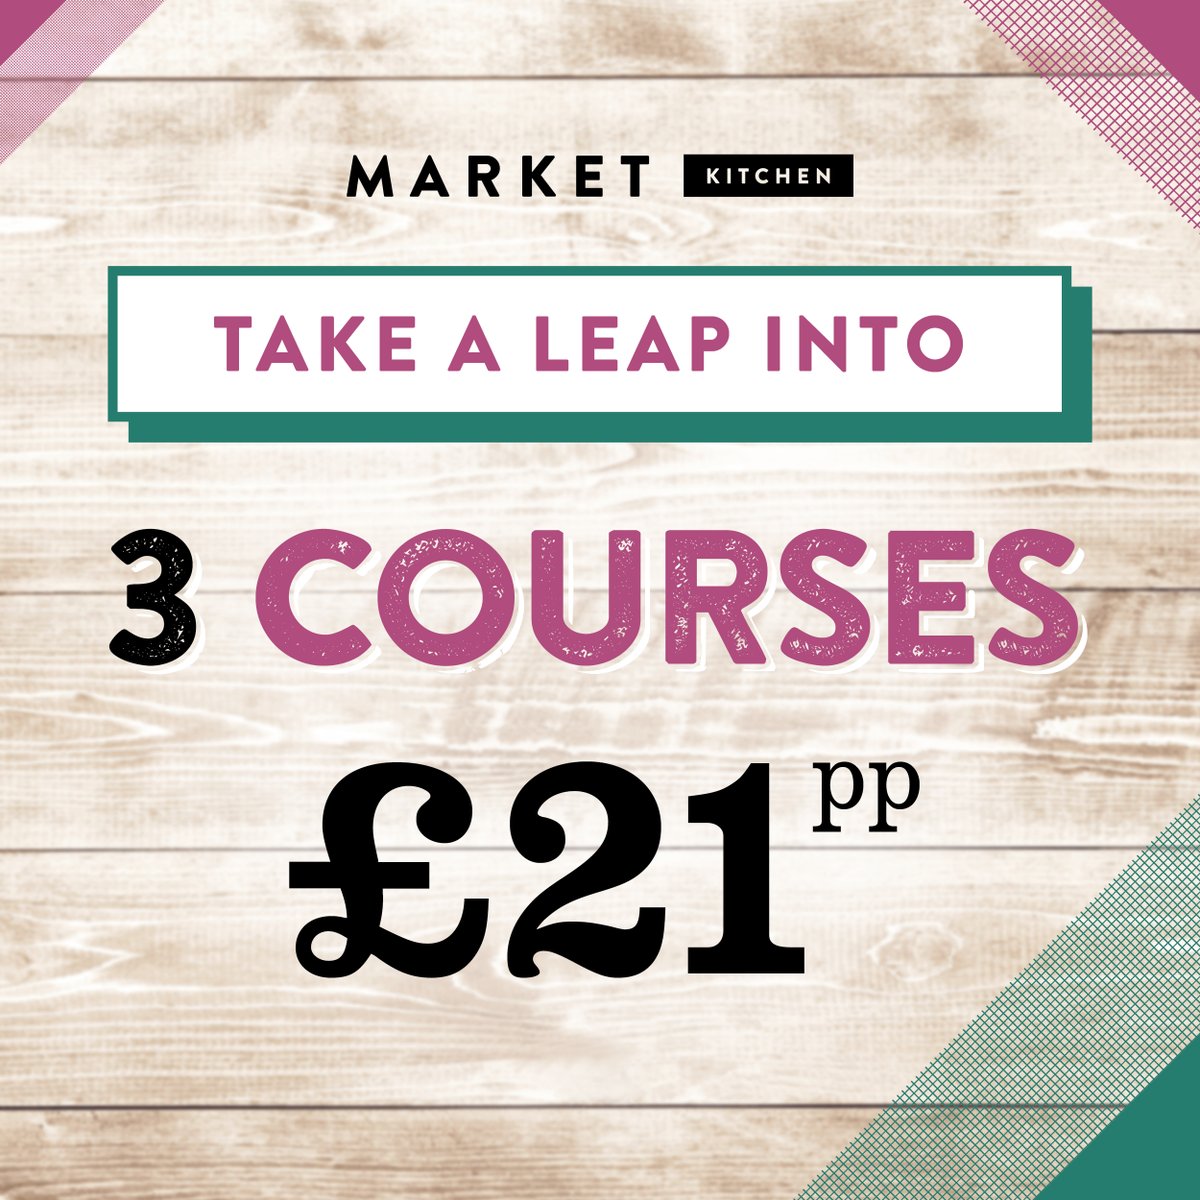 We're leaping into 2020 with our 3-course set menu! Book to enjoy yours now. ➡️TableResMarriott.com/market-kitchen… #LeapYear #WinterWarmer #BritishClassics #3-Courses #Food #Dine #MarketKitchen